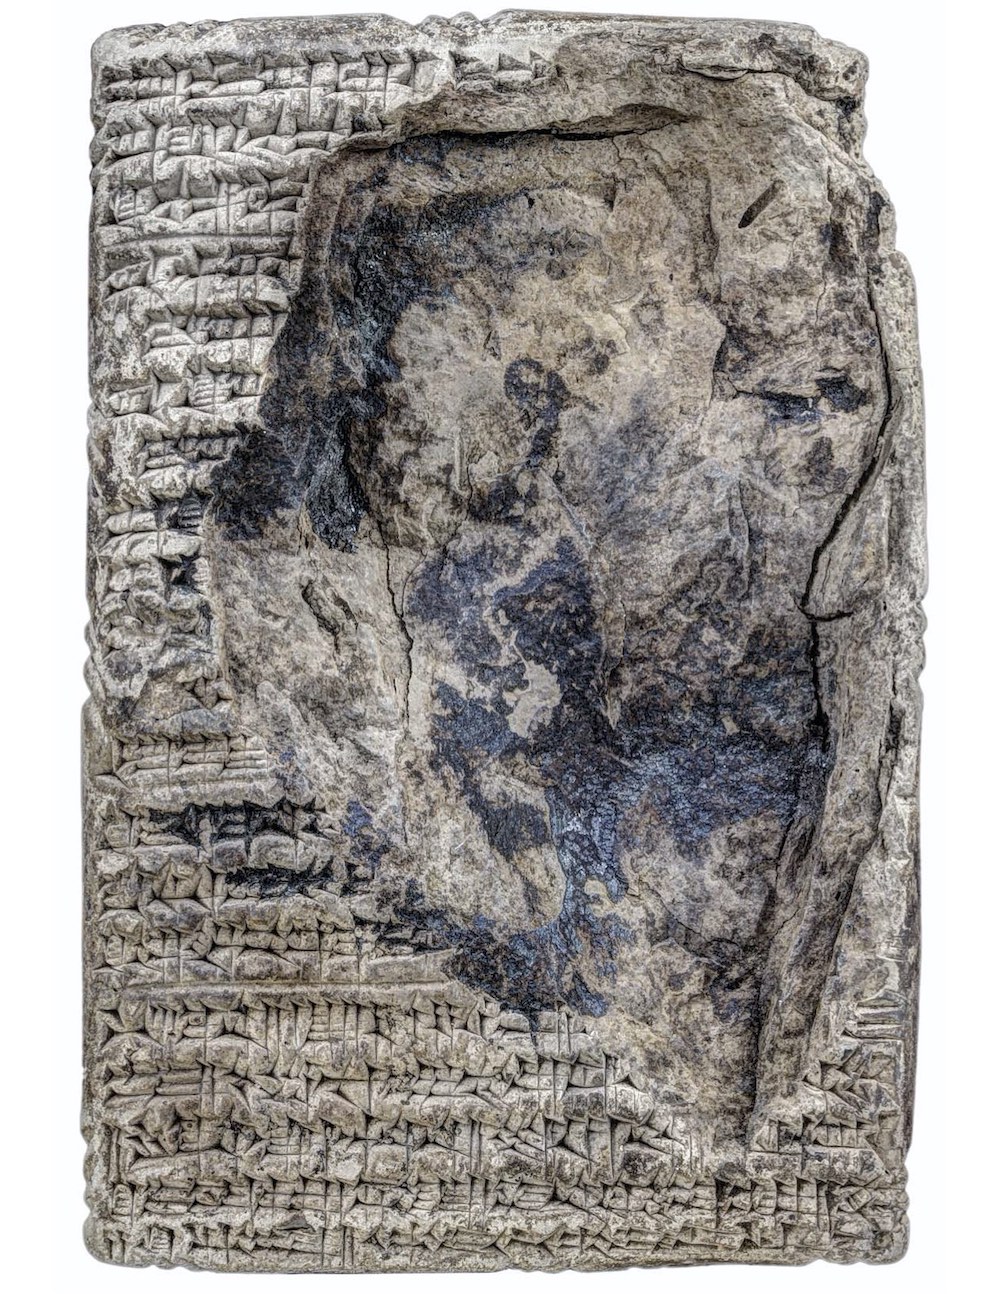 Fragmentary obverse of a house sale contract. Courtesy of the Yale Babylonian Collection.